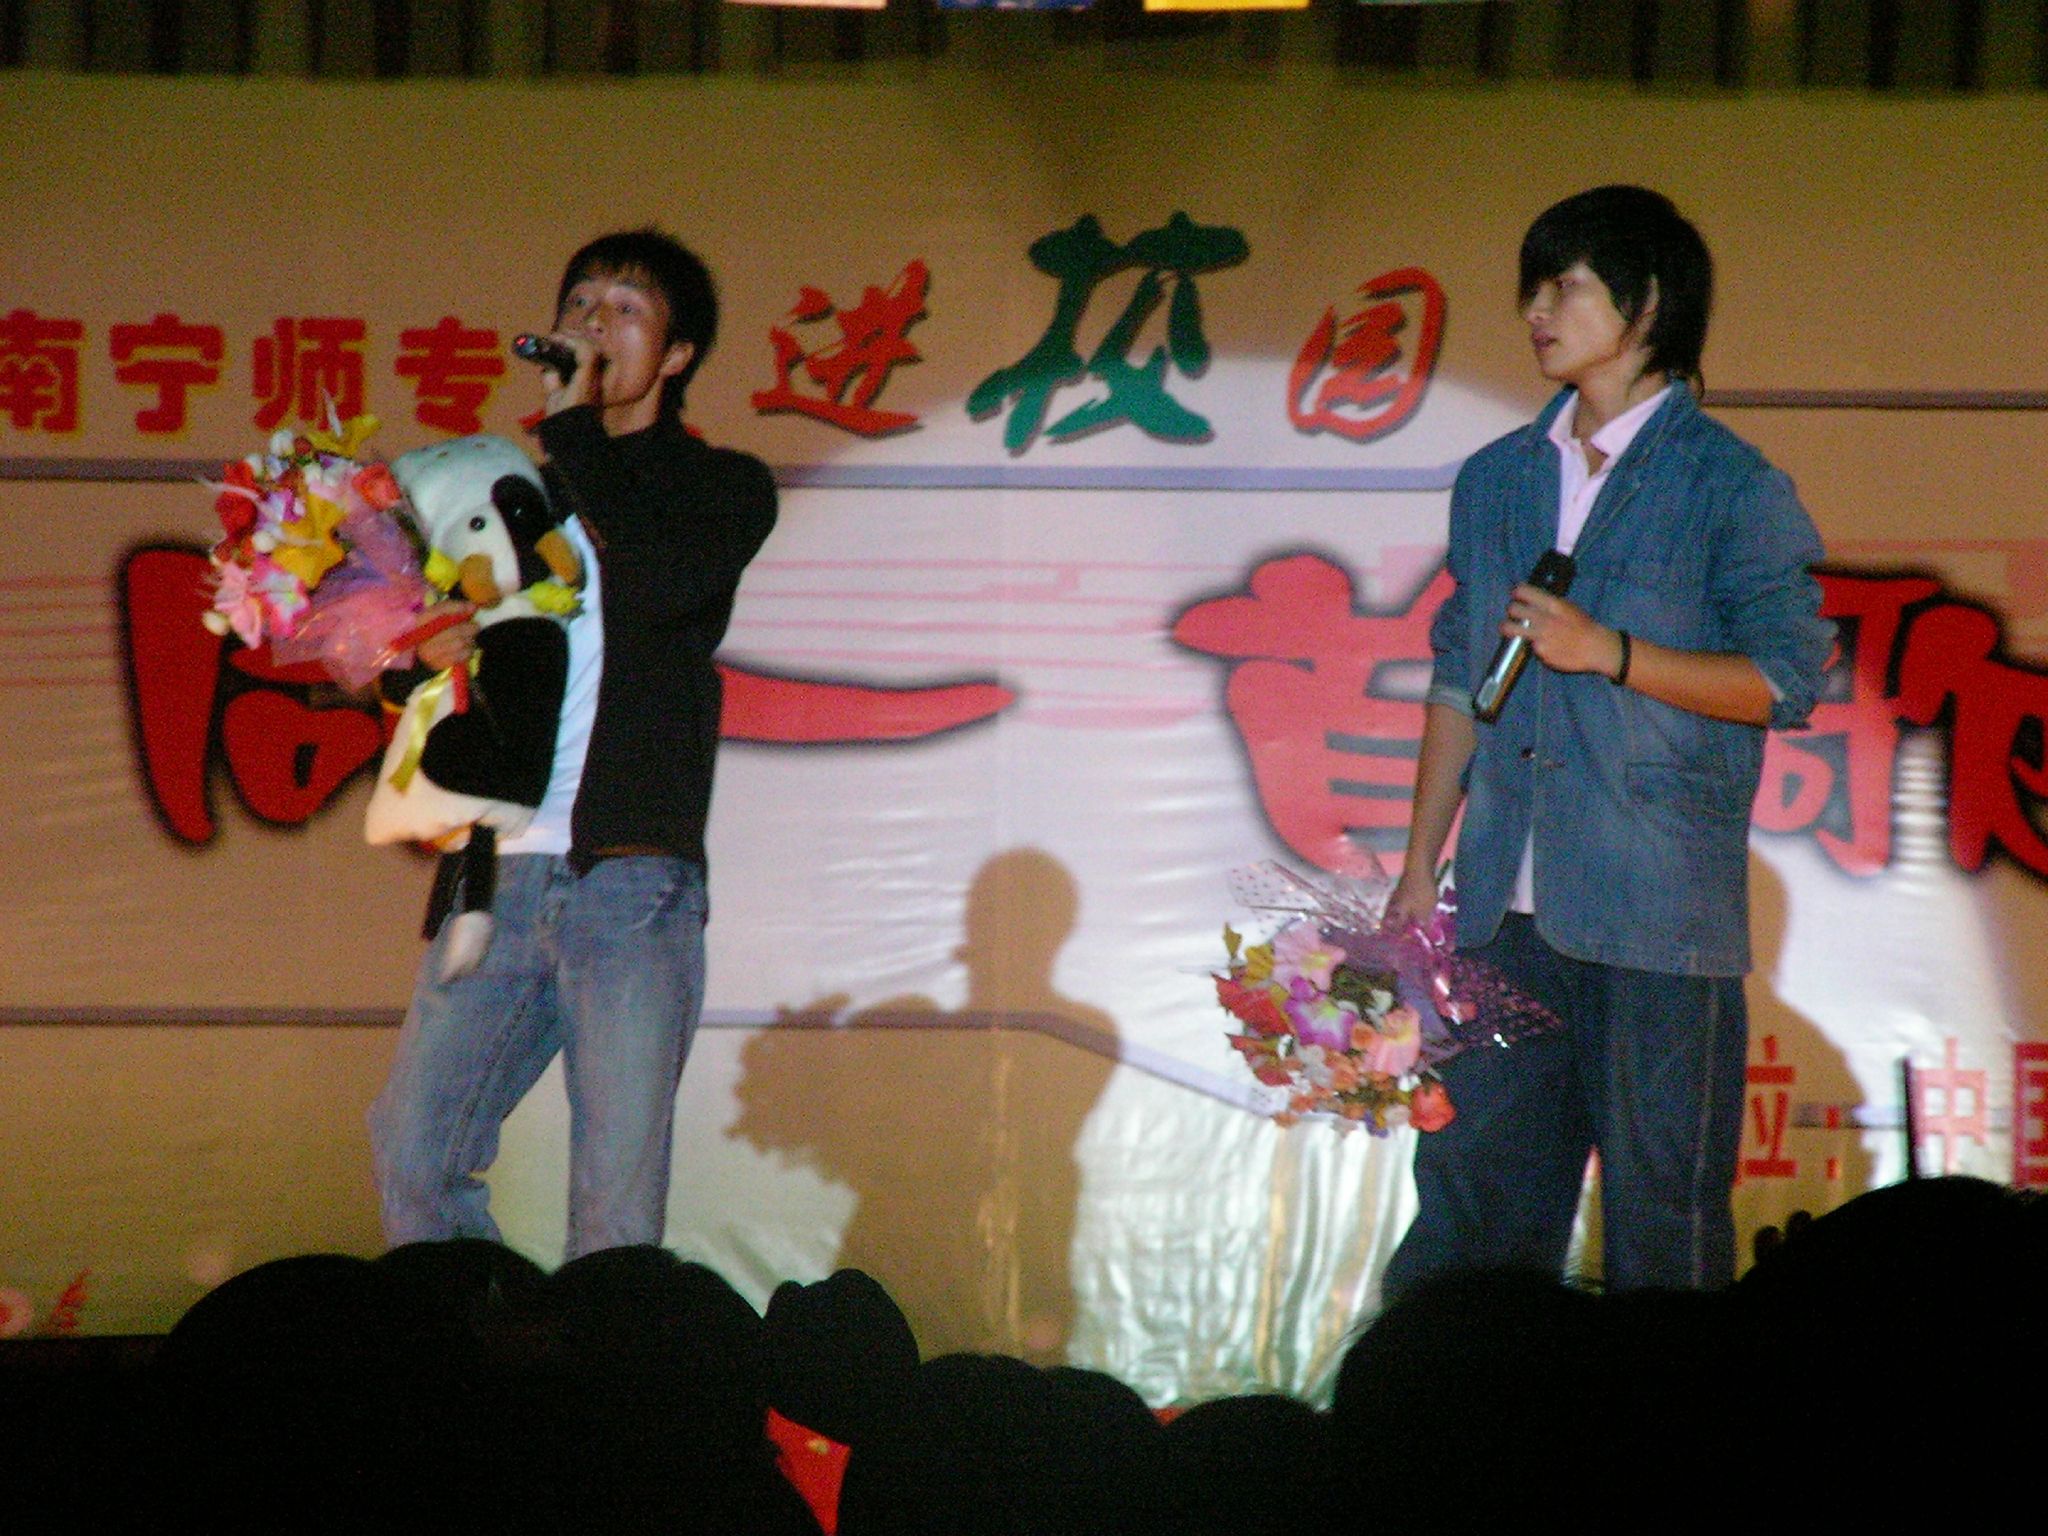 there are two men standing up on the stage